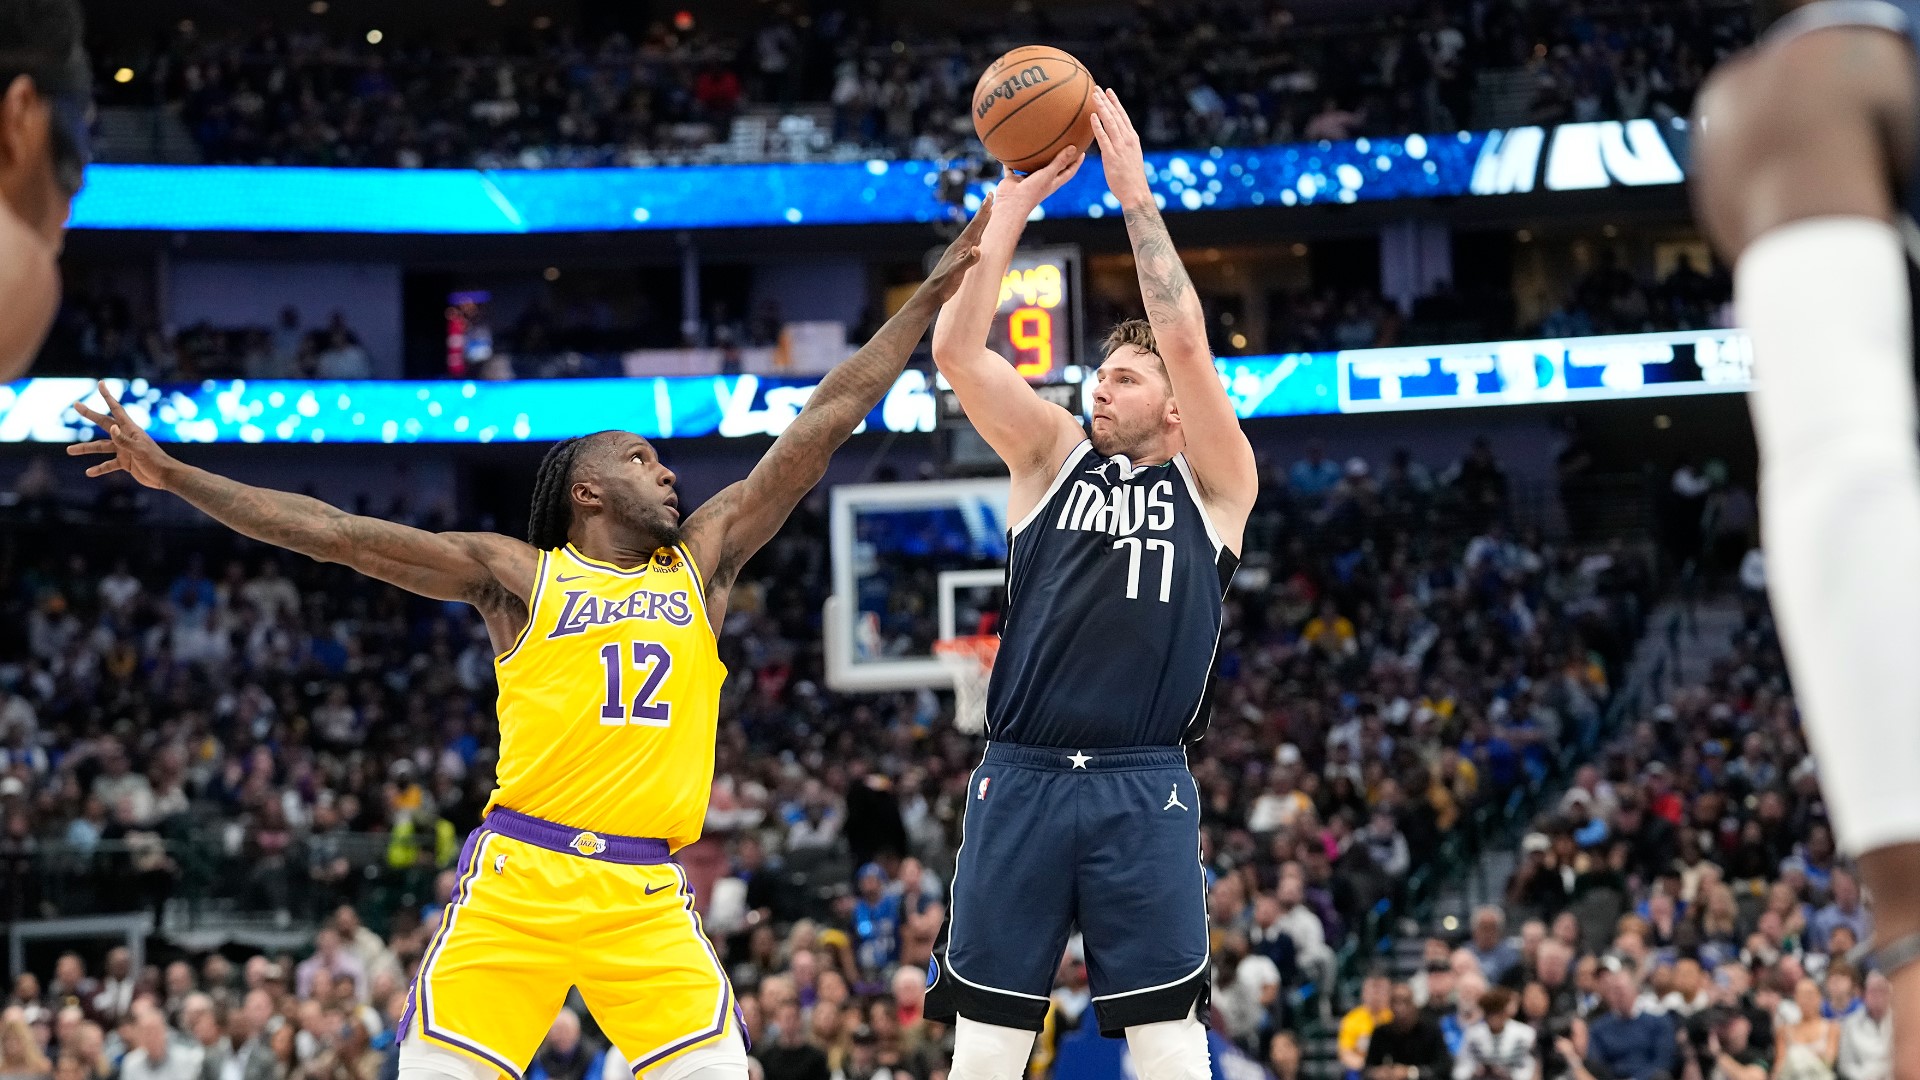 Luka Doncic had 33 points and 17 assists, Tim Hardaway Jr. scored a season-high 32 points and the Dallas Mavericks beat Los Angeles 127-125 on Tuesday night.